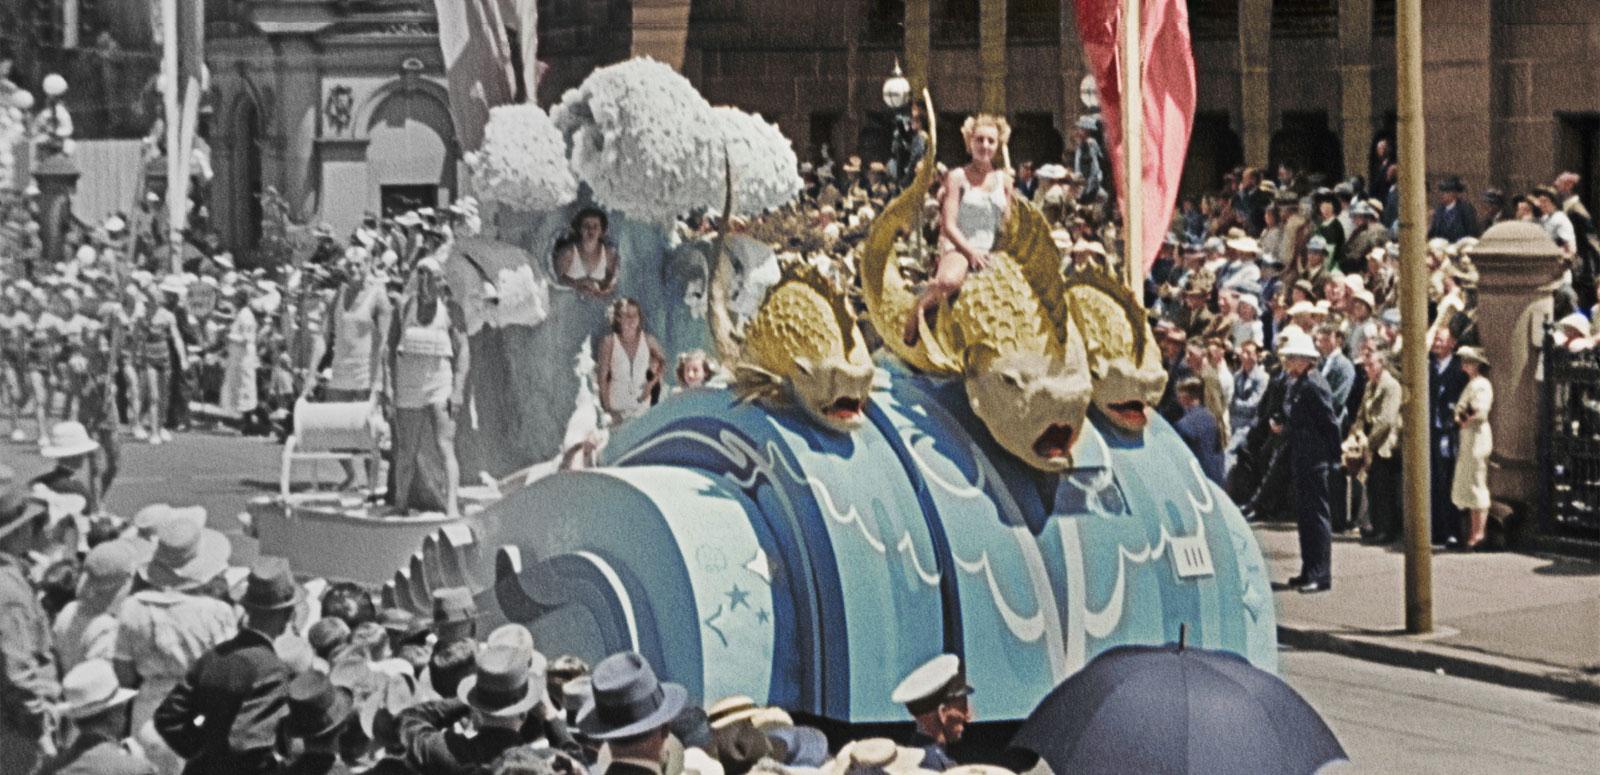 A partly colourised photo of a nautical-themed float in a 1930s street parade. On the float a woman dressed in white sits on a large-scale model of a sea creature.